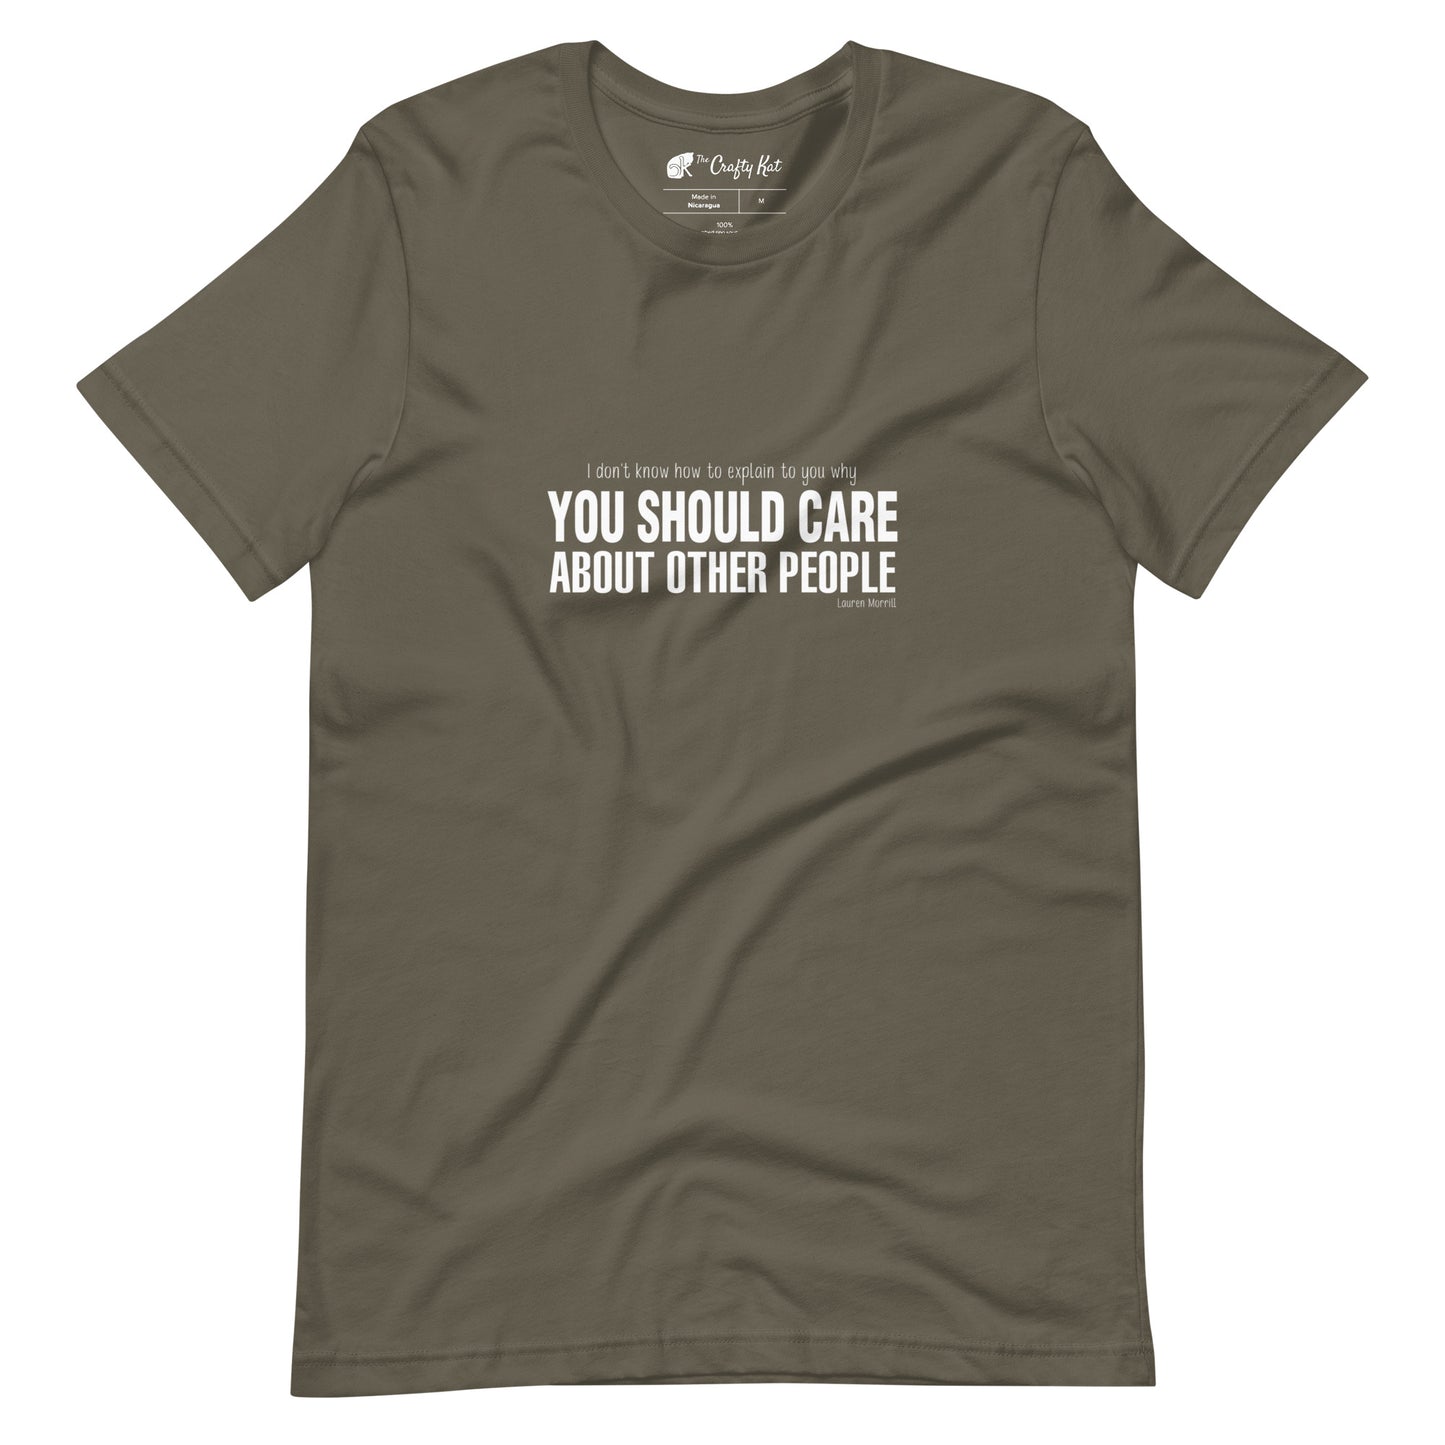 Army (olive tan) t-shirt with quote by Lauren Morrill: "I don't know how to explain to you why YOU SHOULD CARE ABOUT OTHER PEOPLE"